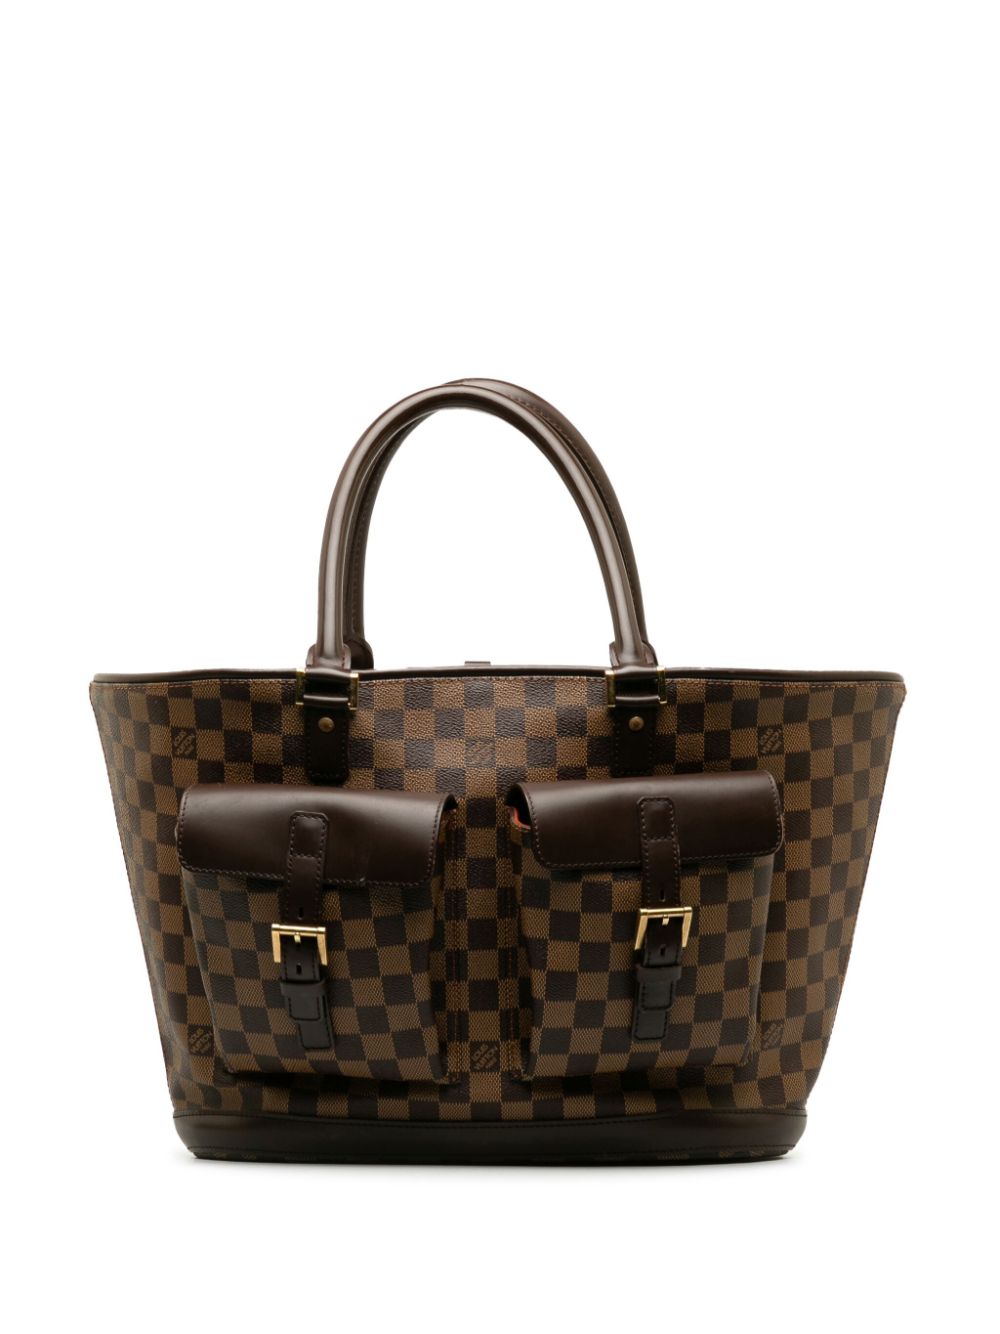 Pre-owned Louis Vuitton 2005 Manosque Gm Tote Bag In Brown